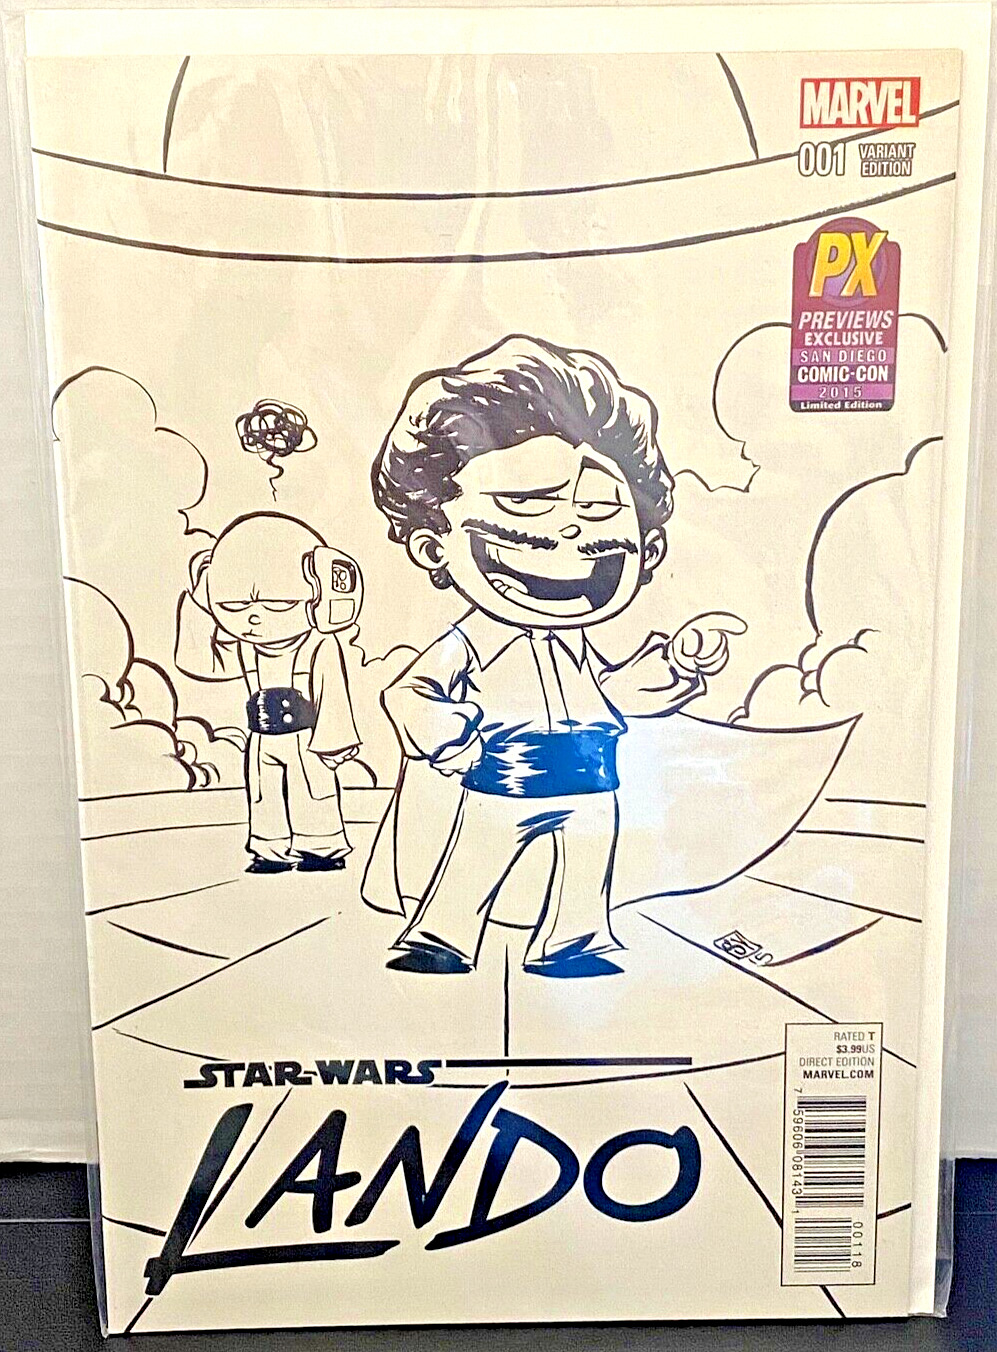 SDCC COMIC CON 2015 PX EXCLUSIVE MARVEL 001 STAR WARS LANDO VARIANT B&W COVER